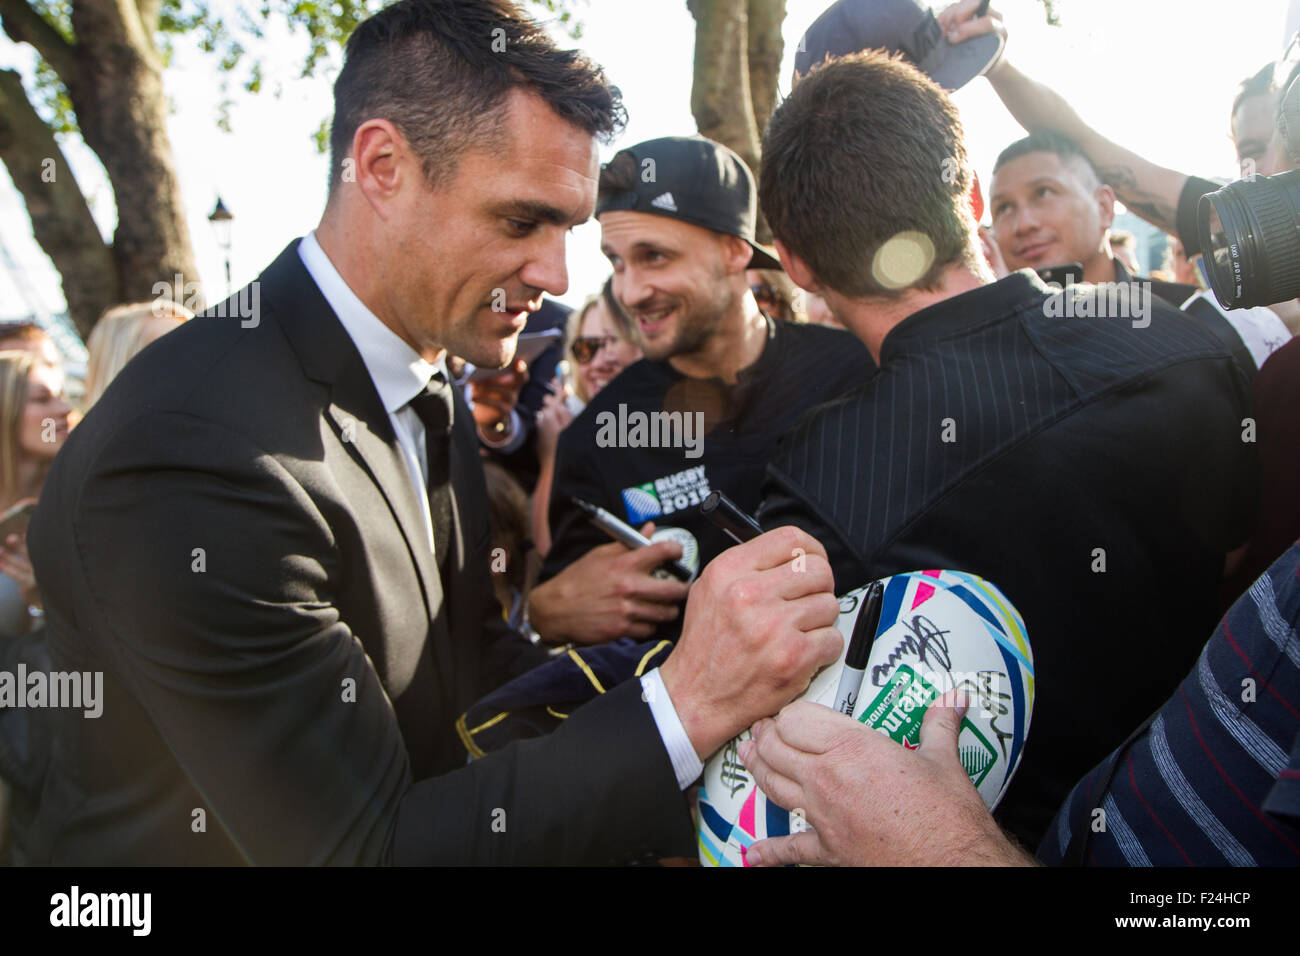 London, UK. 11th September 2015. Dan Carter signing autographs to waiting fans at Tower Bridge after the welcoming ceremony for the New Zealand rugby team for the 2015 Rugby World Cup. 20 teams from around the world will be competing to win the Webb Ellis Cup and declared RWC 2015 winners. New Zealand are the current title holders, winning the trophy in 2011. Credit: Elsie Kibue / Alamy Live News Stock Photo